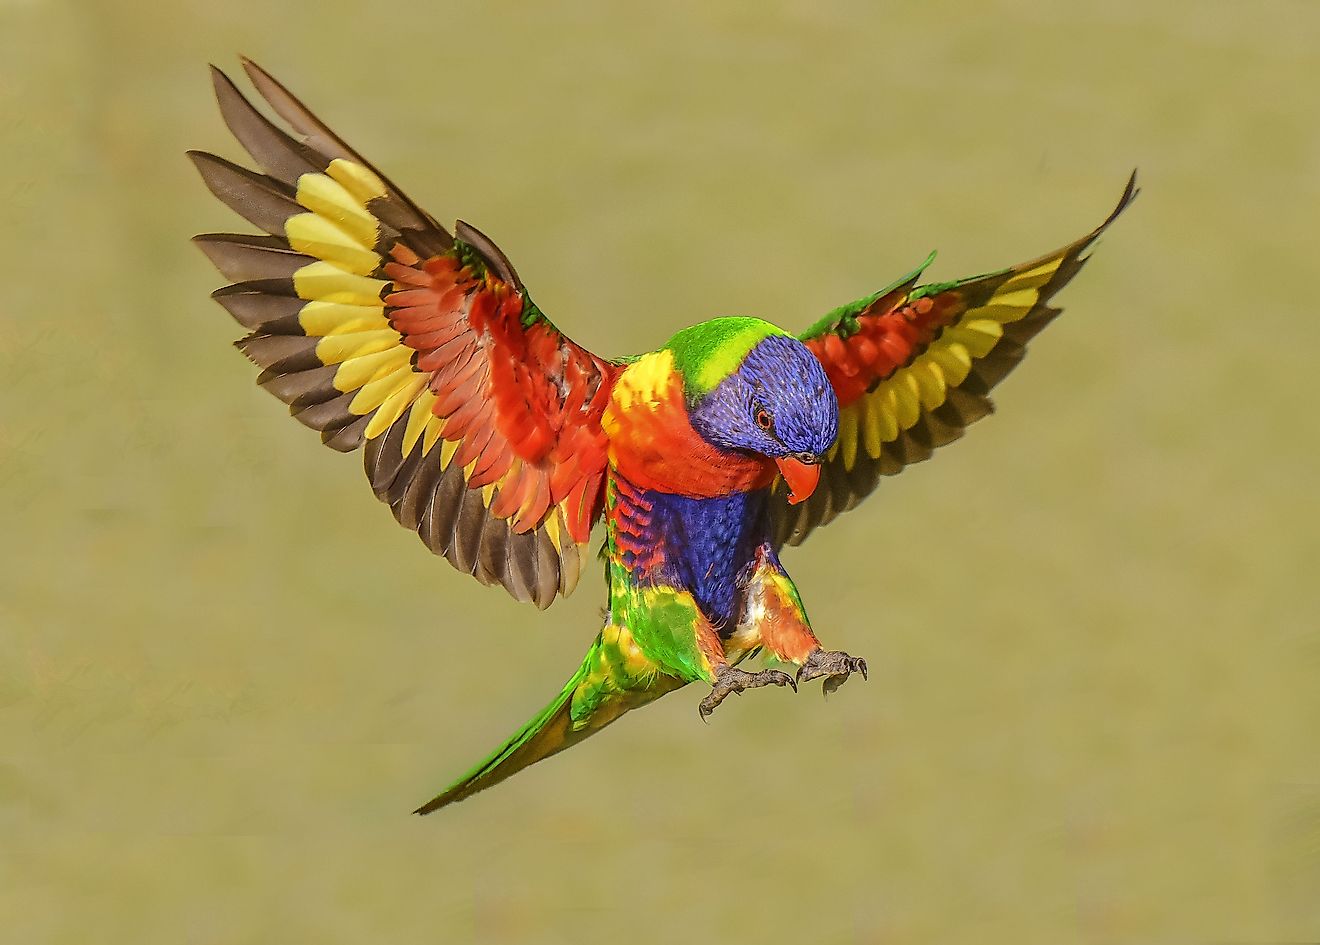 Rainbow lorikeets are aptly named for their bright colours. Image credit: On the Wing Photography/Shutterstock.com